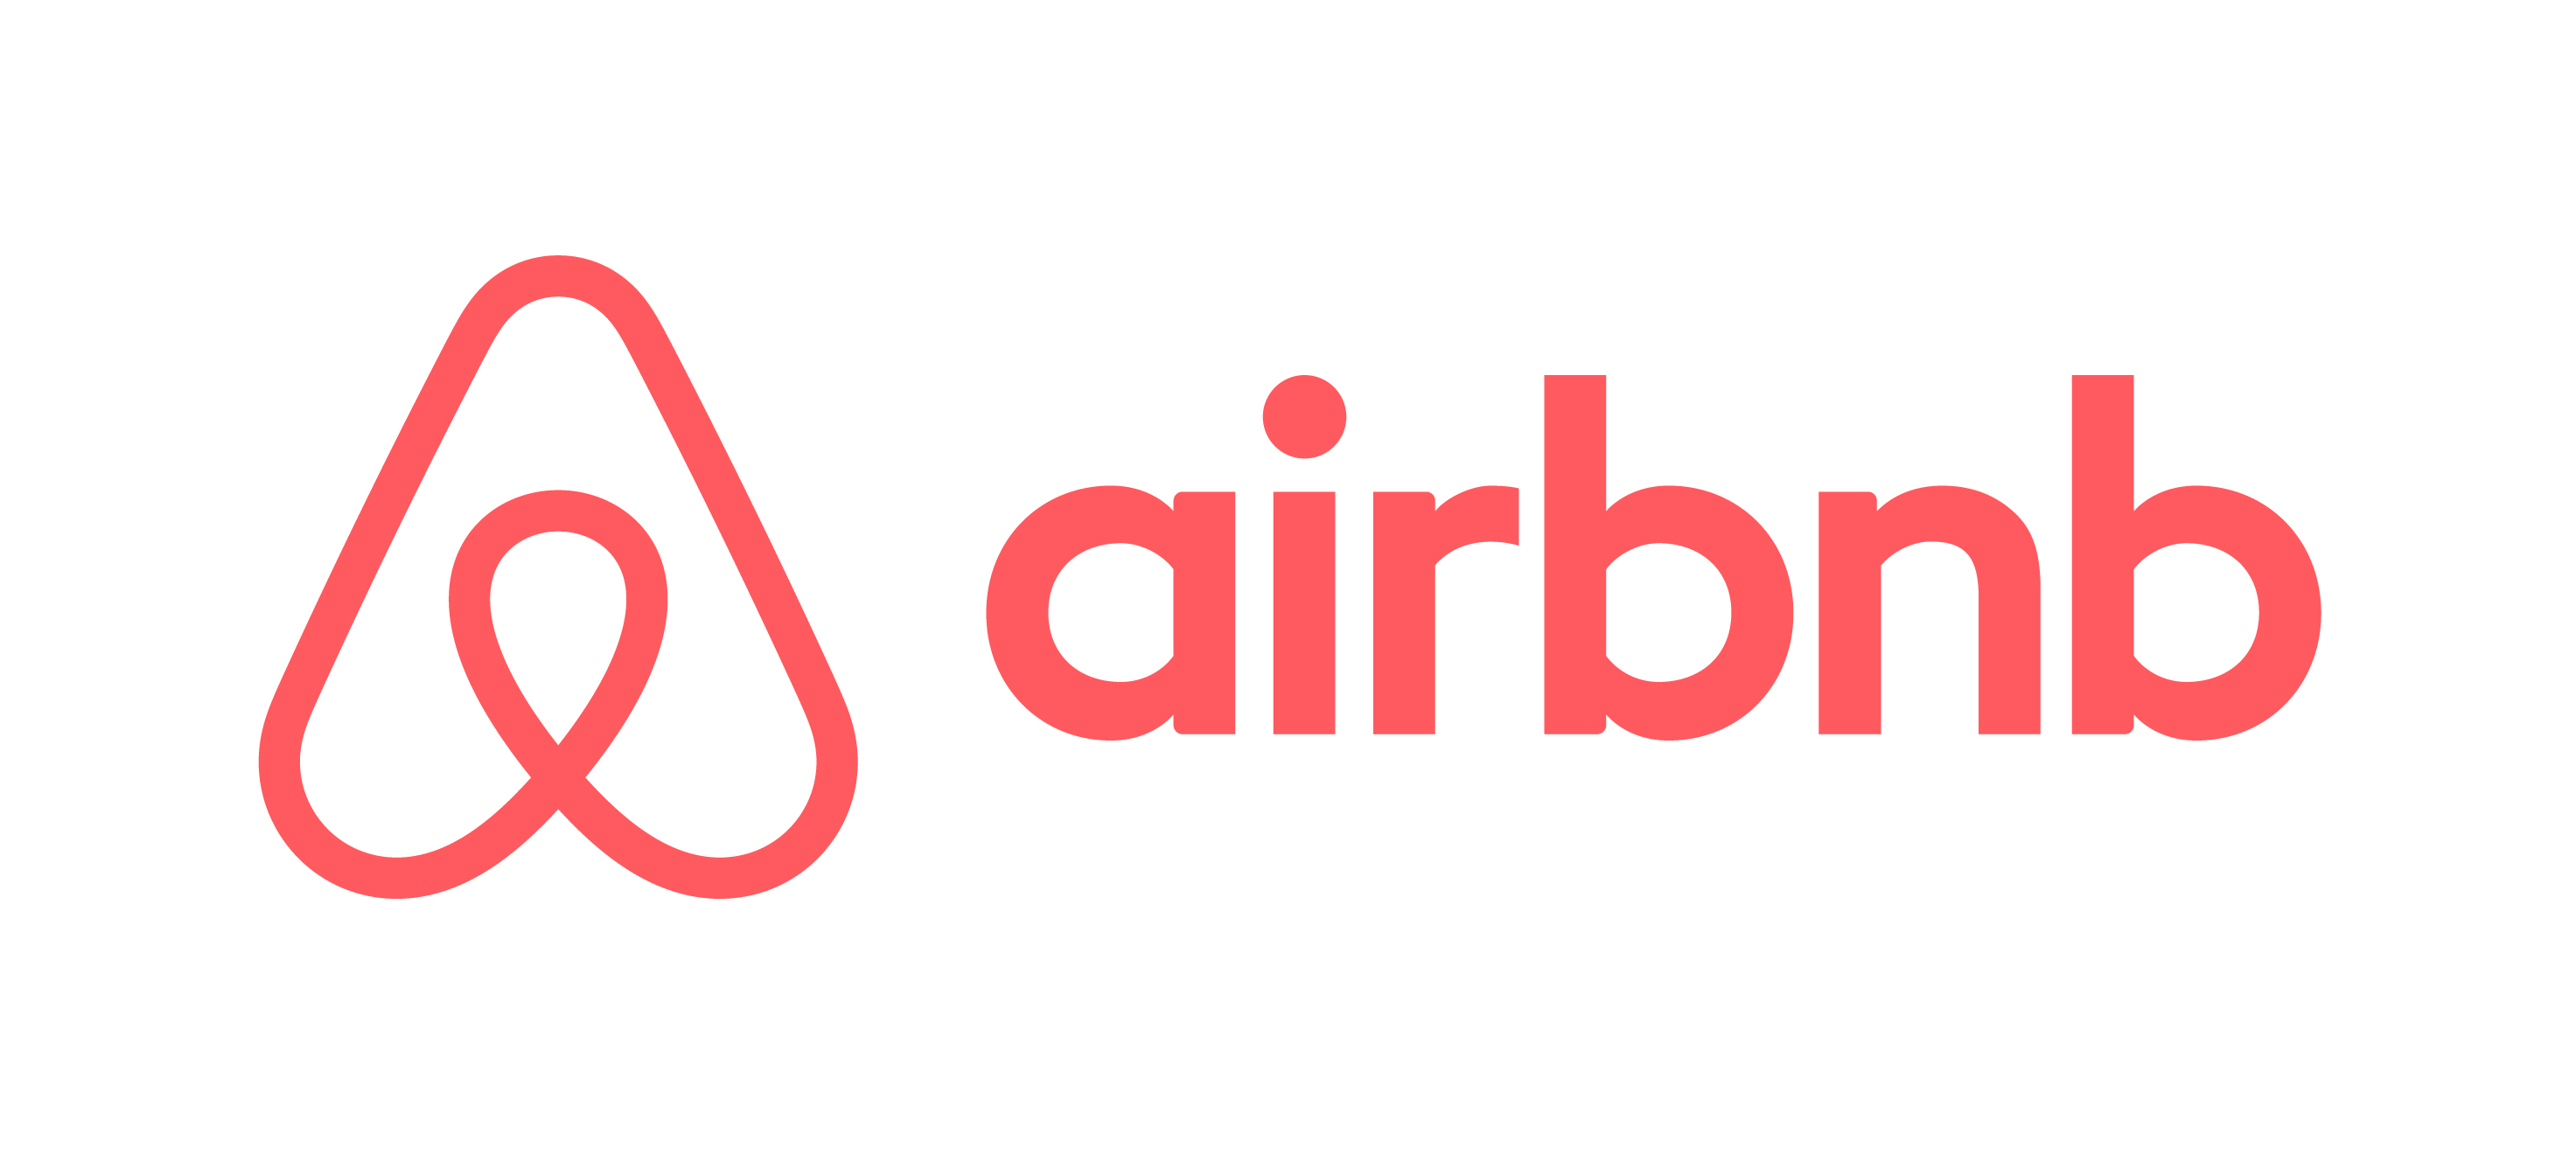 Potential new residents will be guided by Airbnb’s ‘Online Experiences’ designed to introduce Topeka to anyone who may be considering relocation.